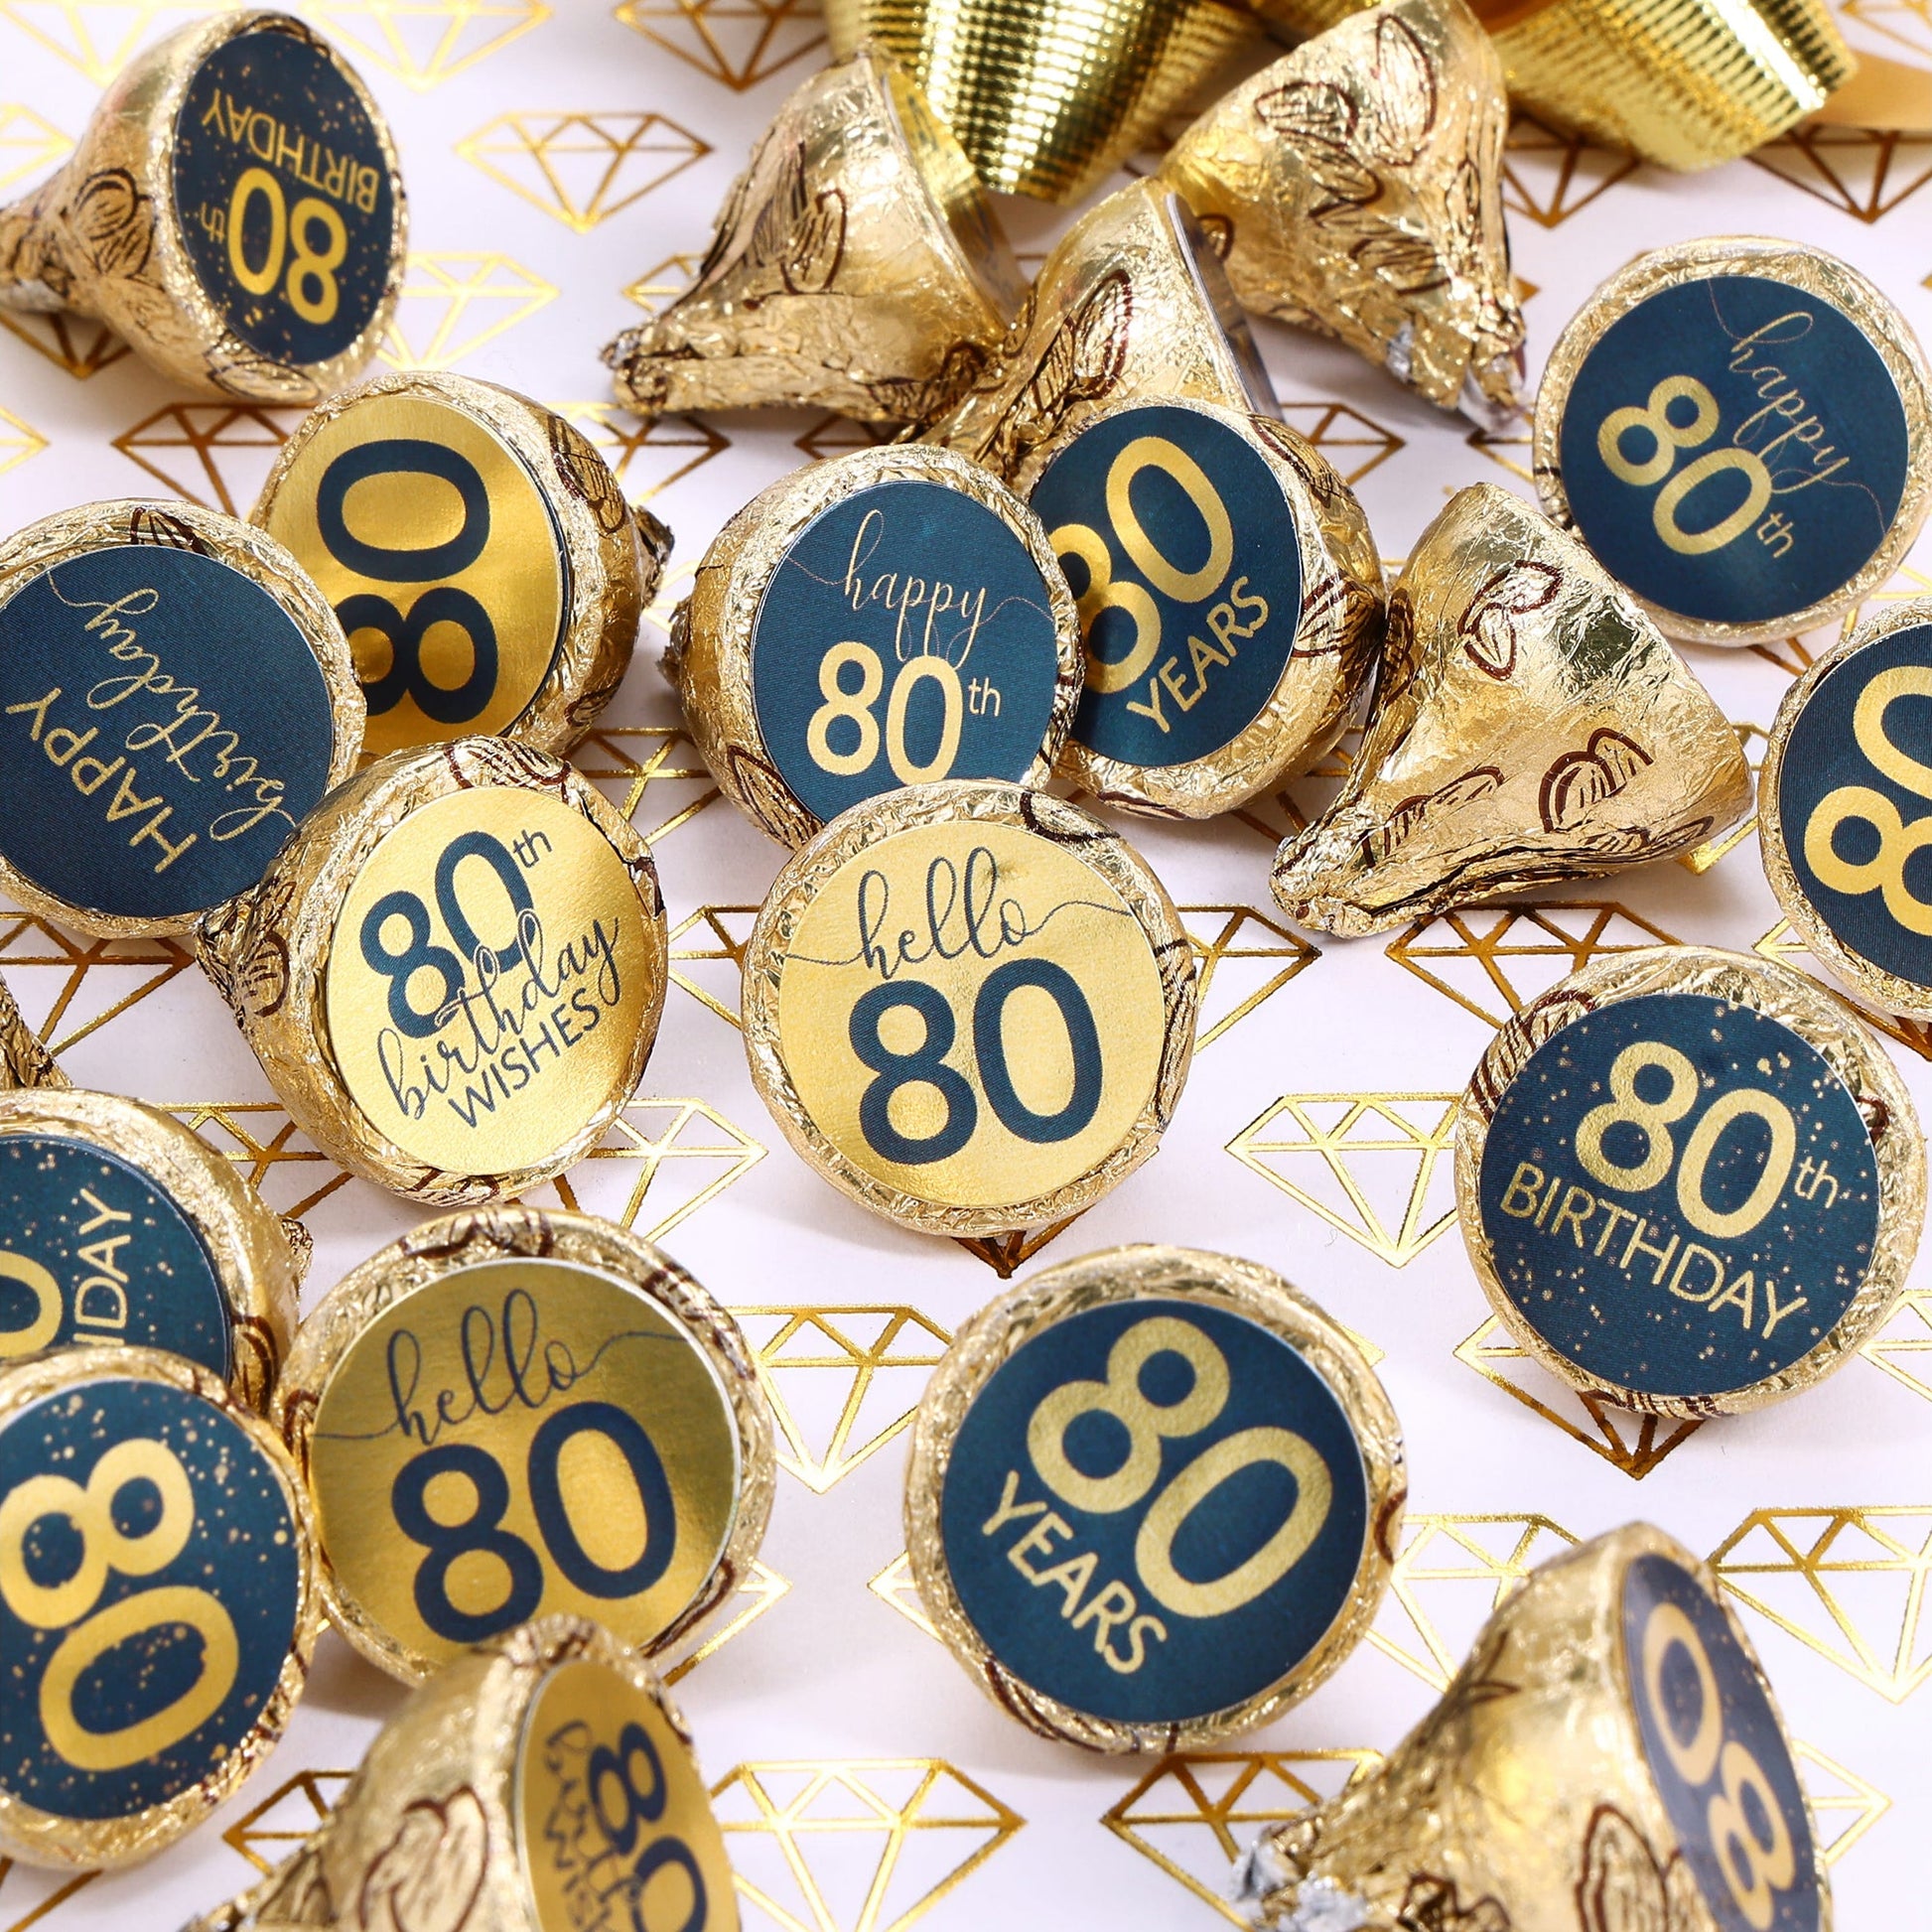 Premium navy blue and gold foil stickers perfect for decorating candy for an 80th birthday party